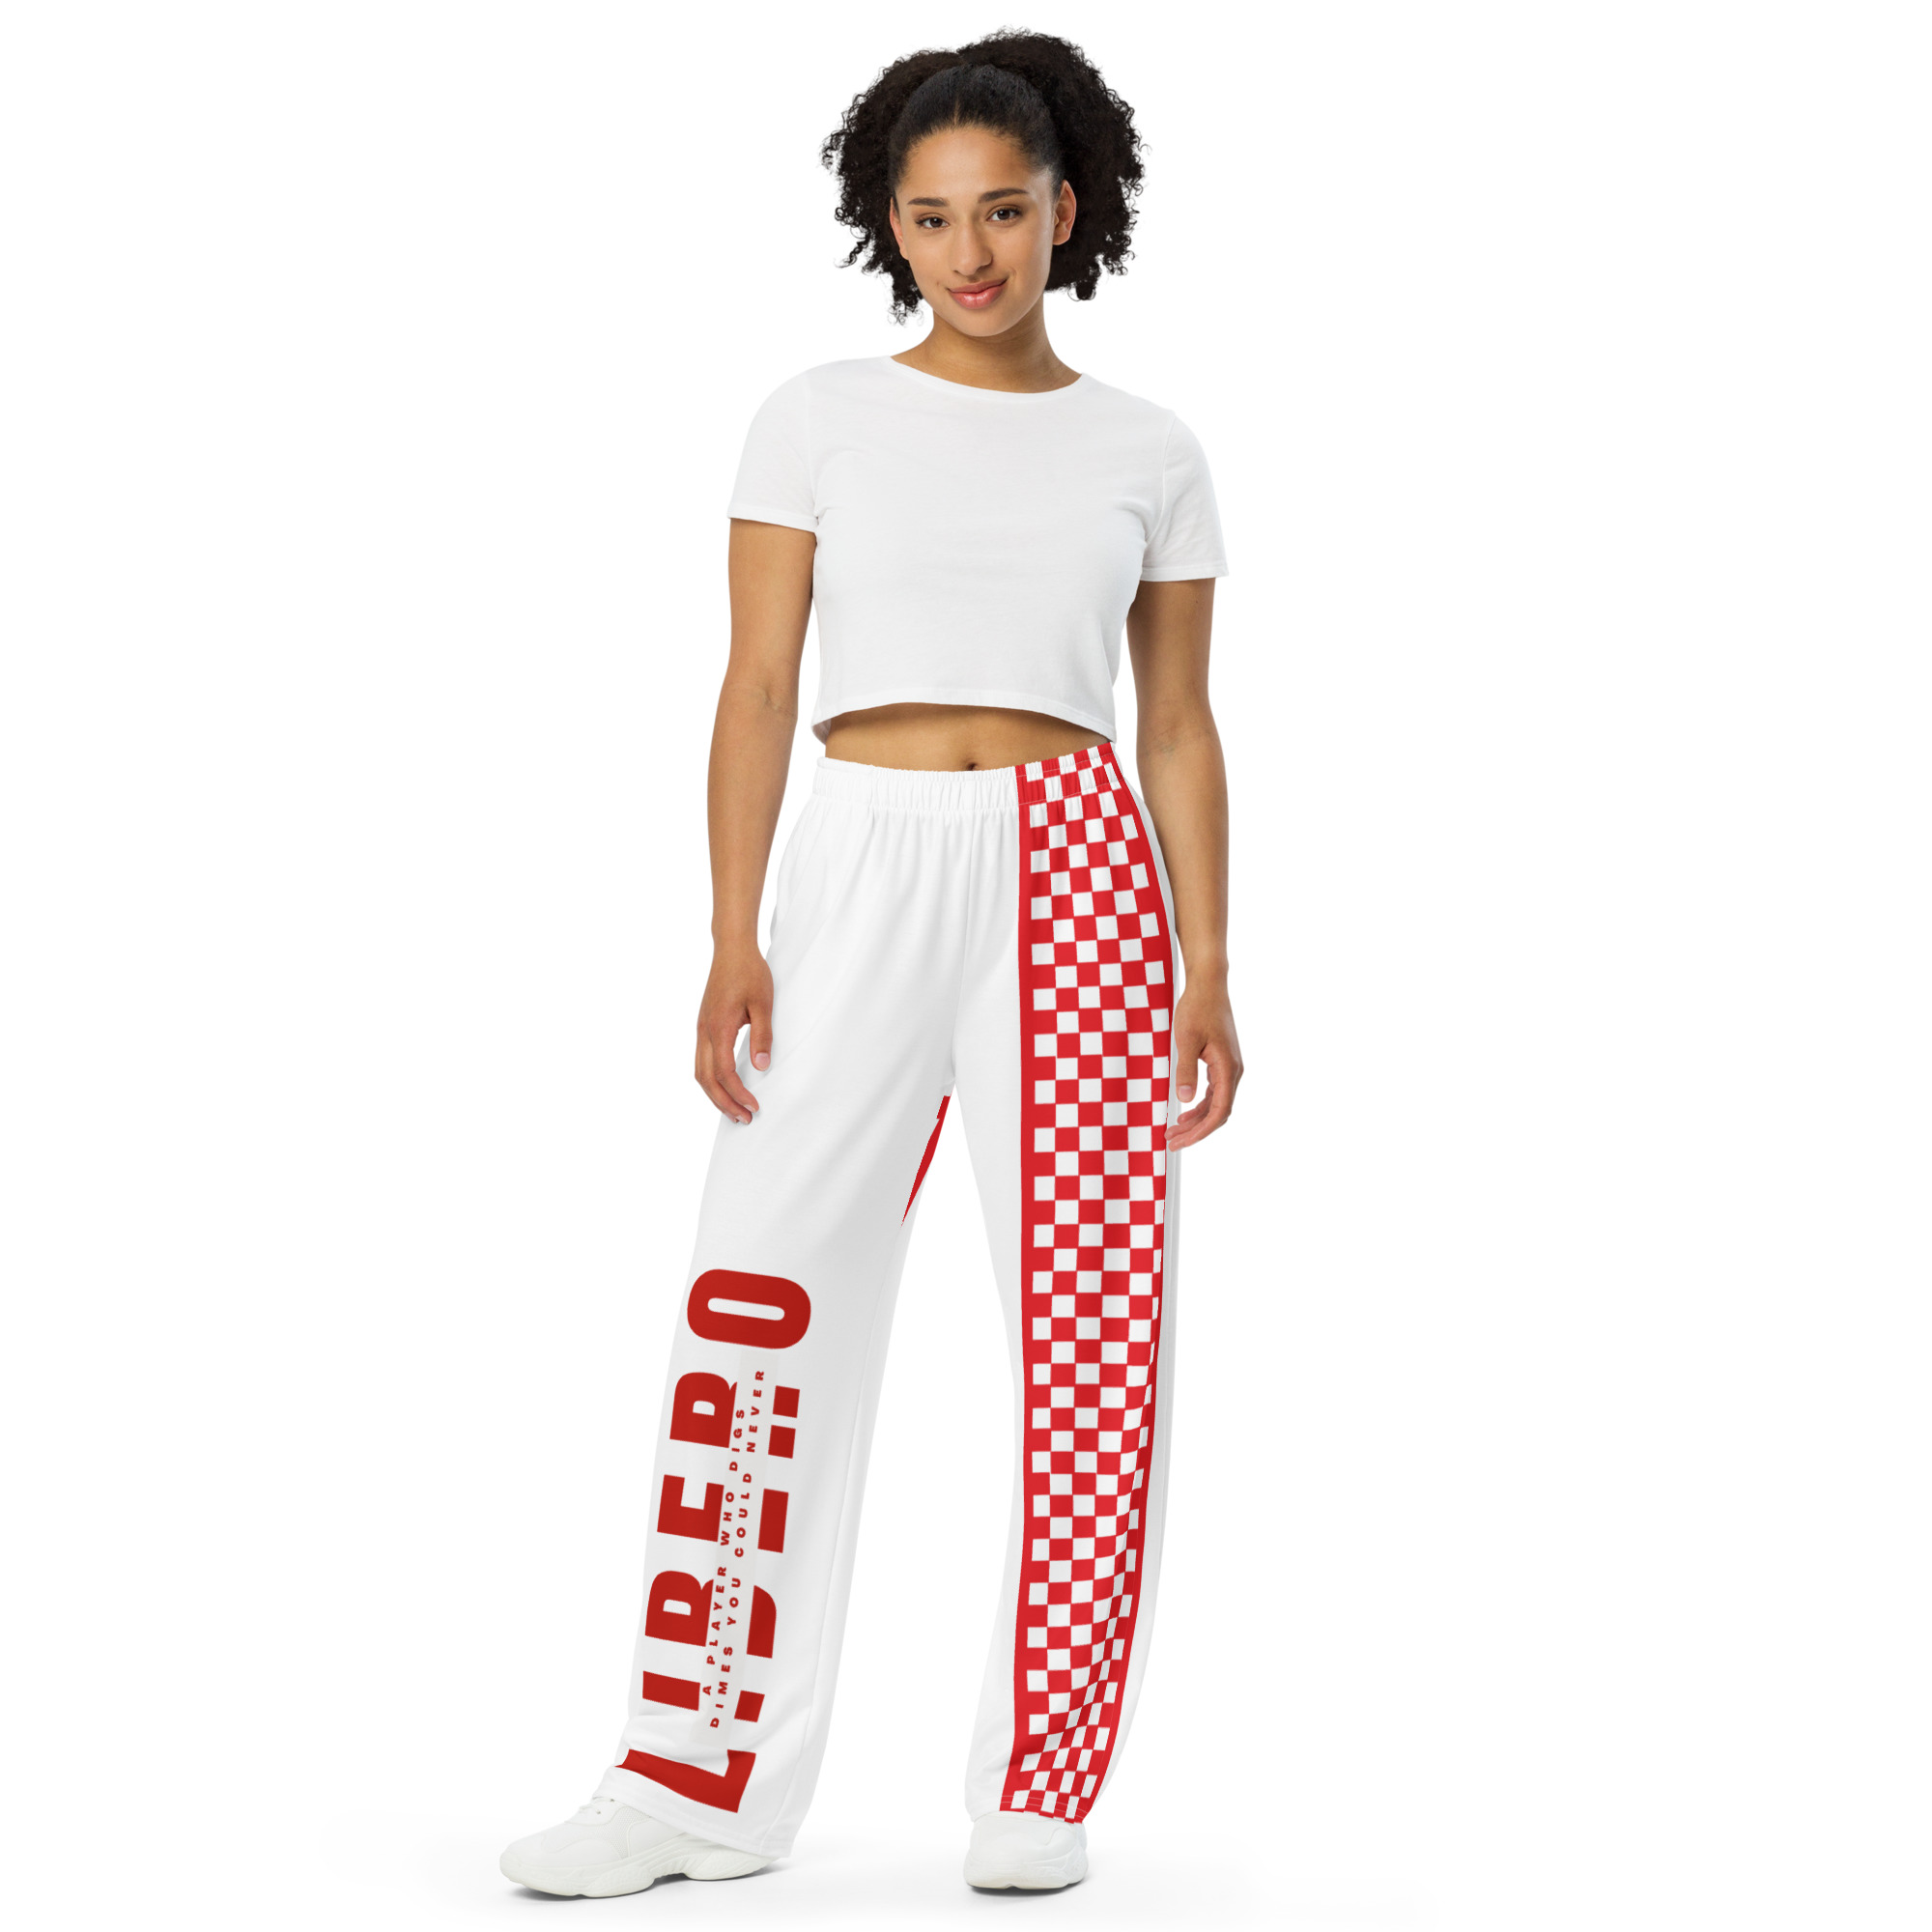 Shop my line of red and white checkered stripe LIBERO Volleyball Wide Leg Pajama Pants with deep pockets and drawstring by Volleybragswag on ETSY.